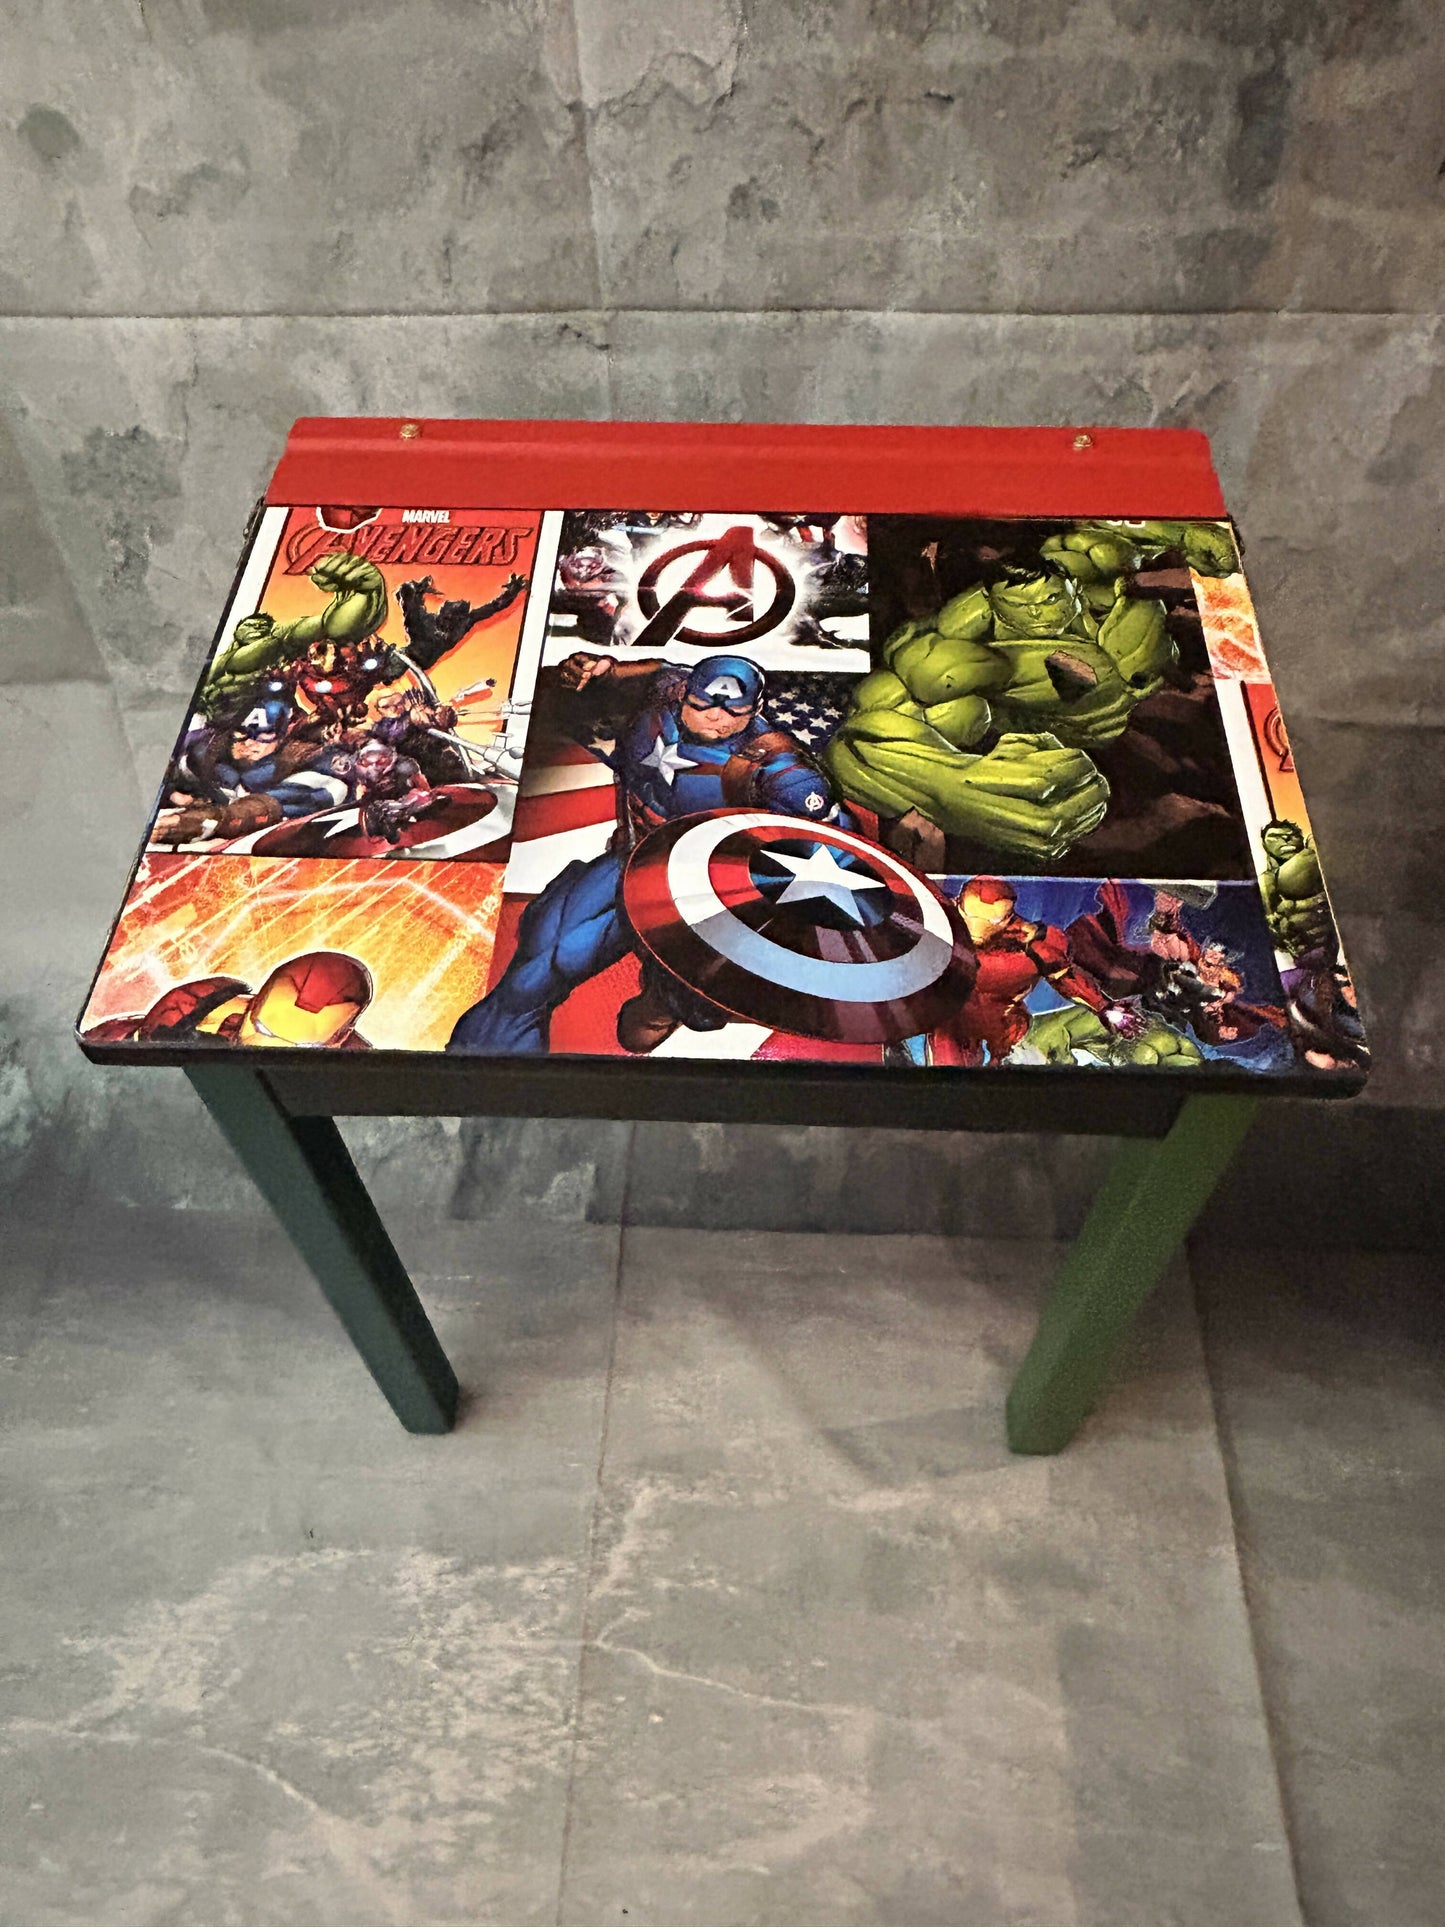 Old style School Desk up cycled with Funky Marvel Design